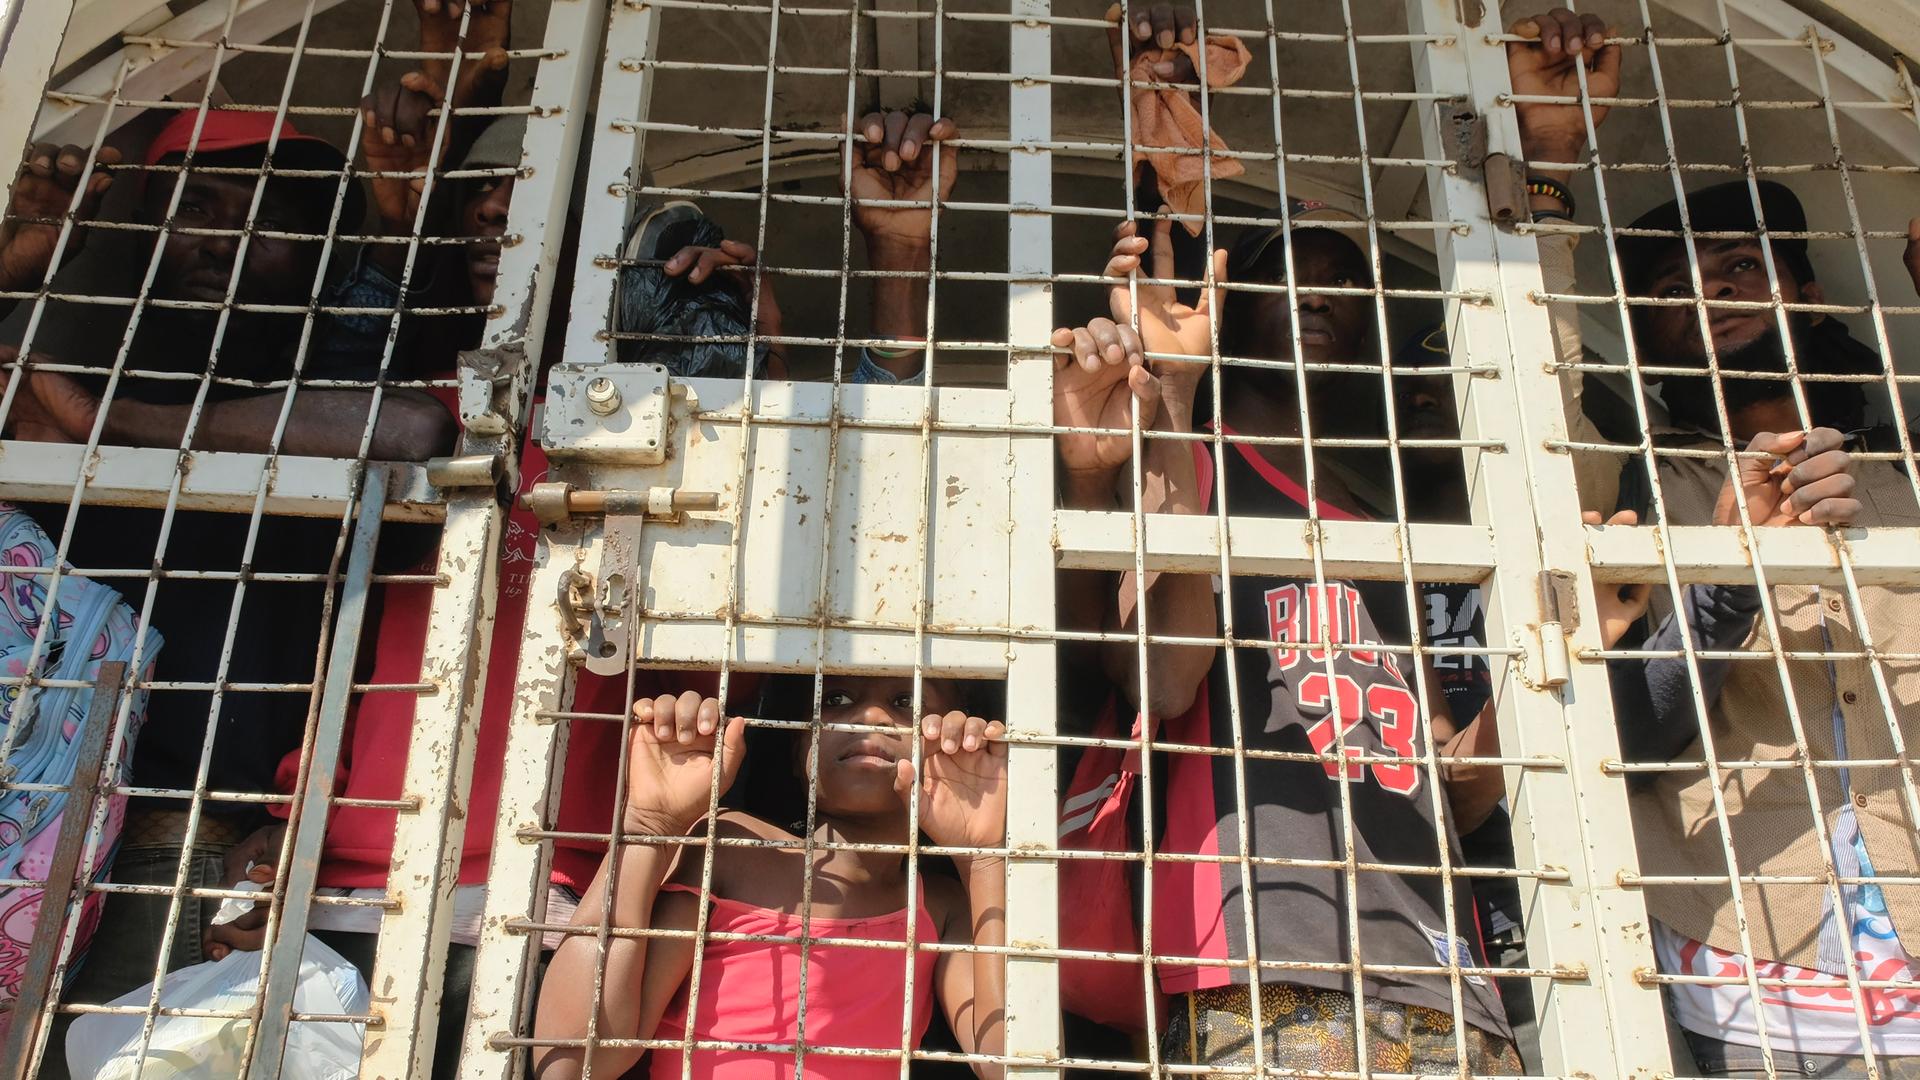 Group of people detained in a truck